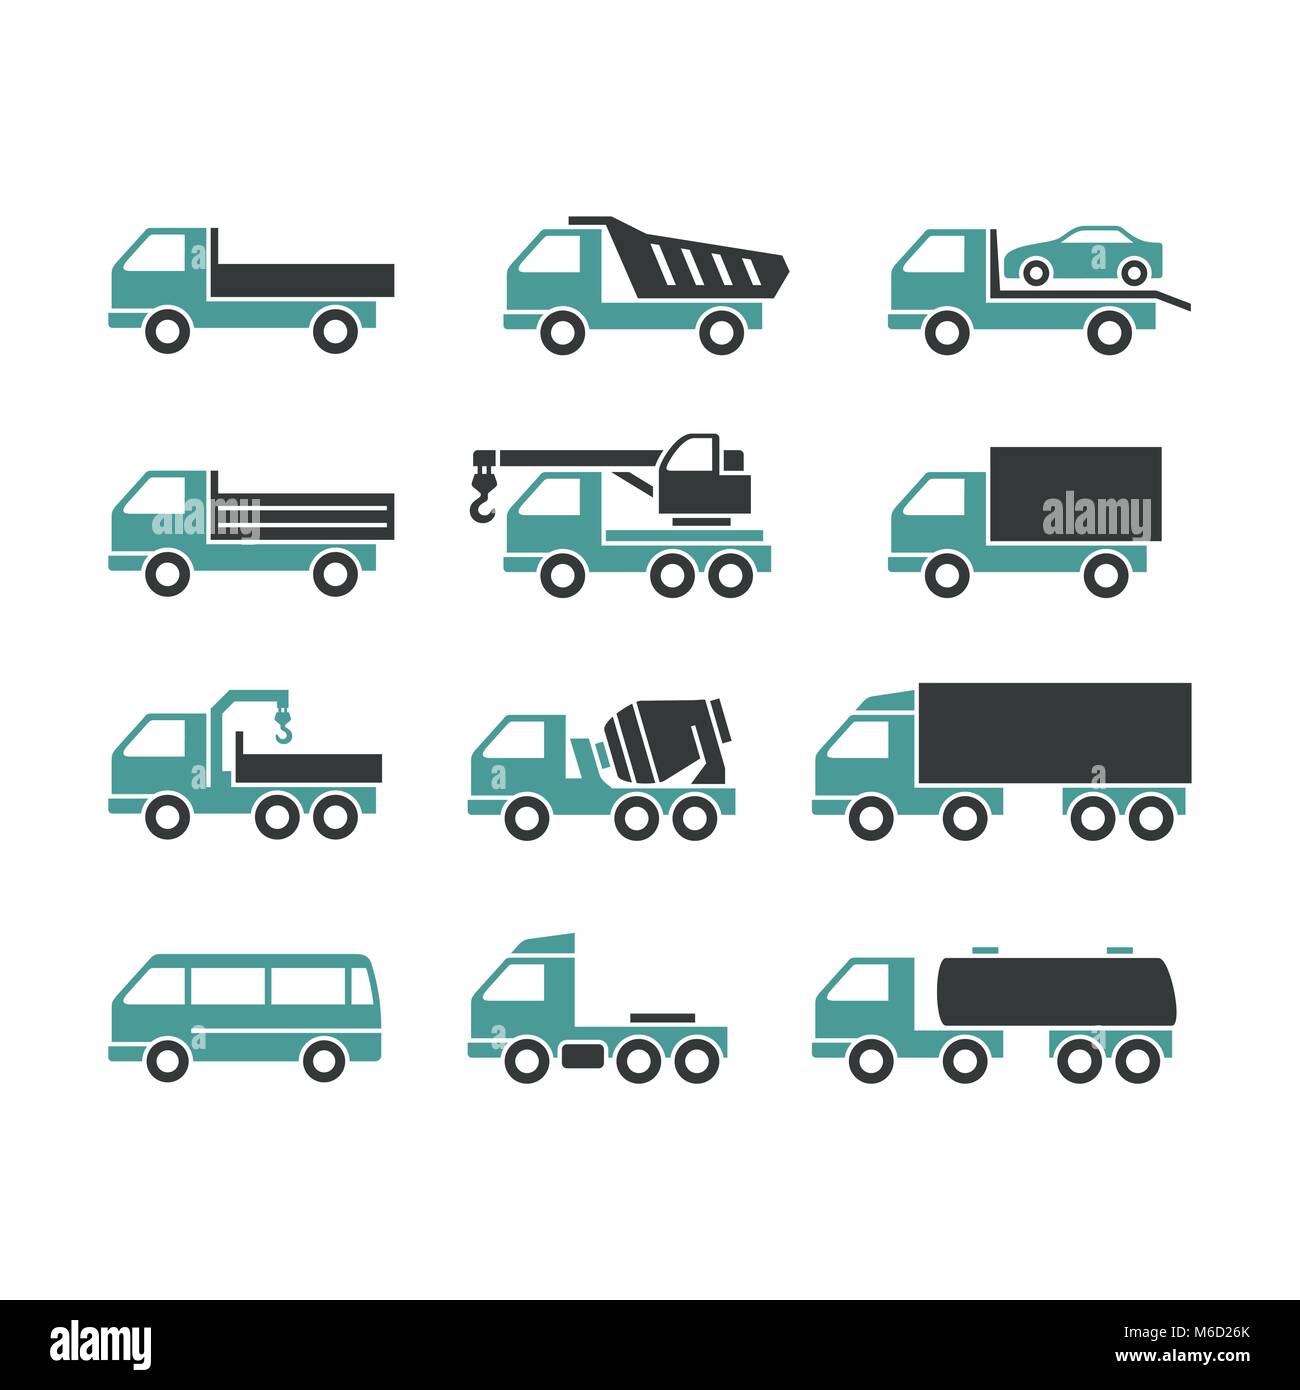 Set of Icons of Trucks on a White Background. Trucks of Different Function. Stock Vector